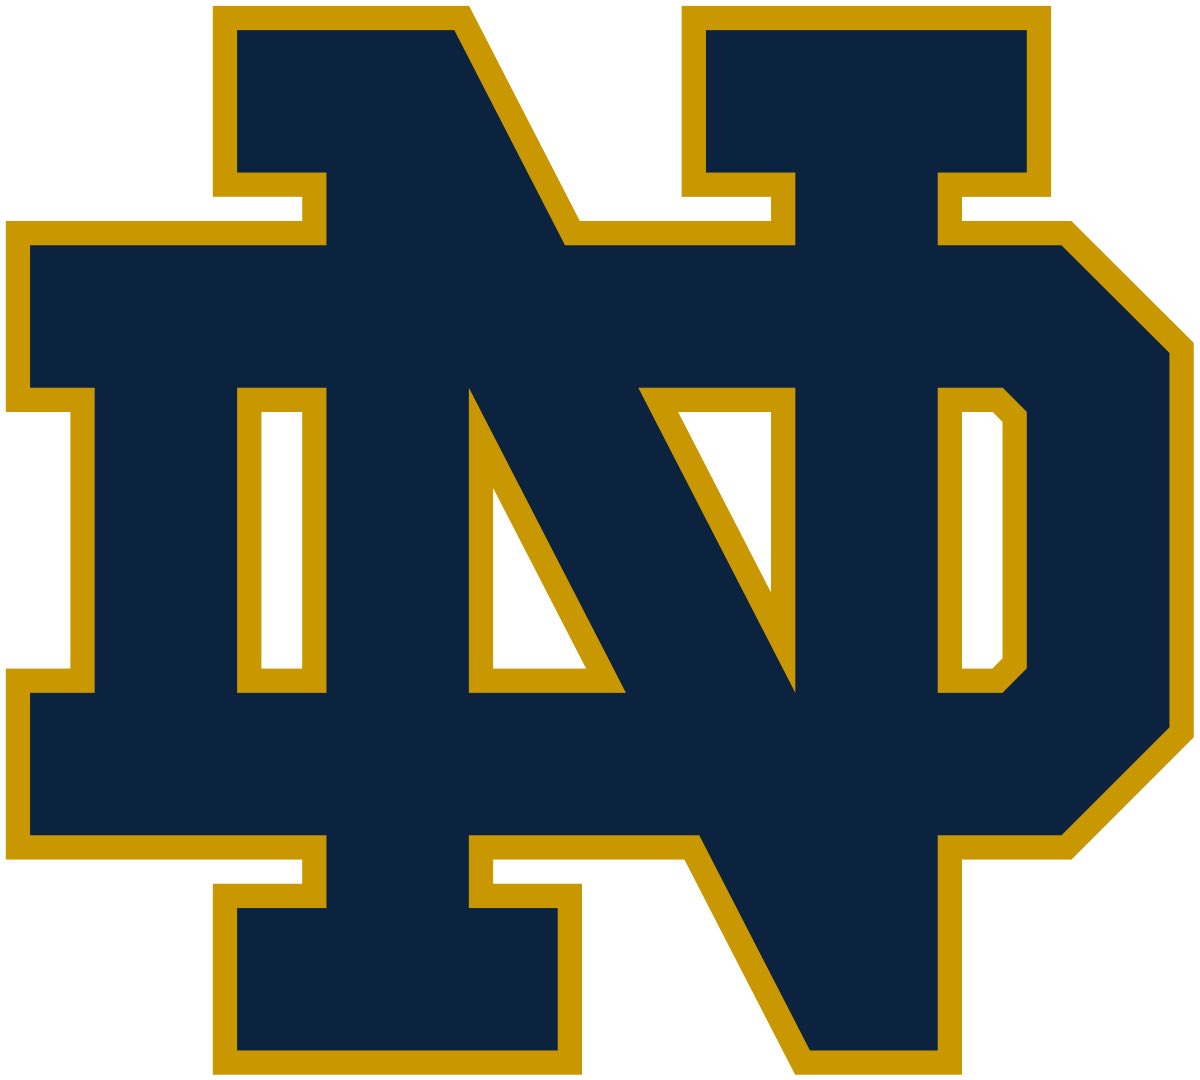 Blessed and honored to receive an offer from The University Of Notre Dame! #AGTG